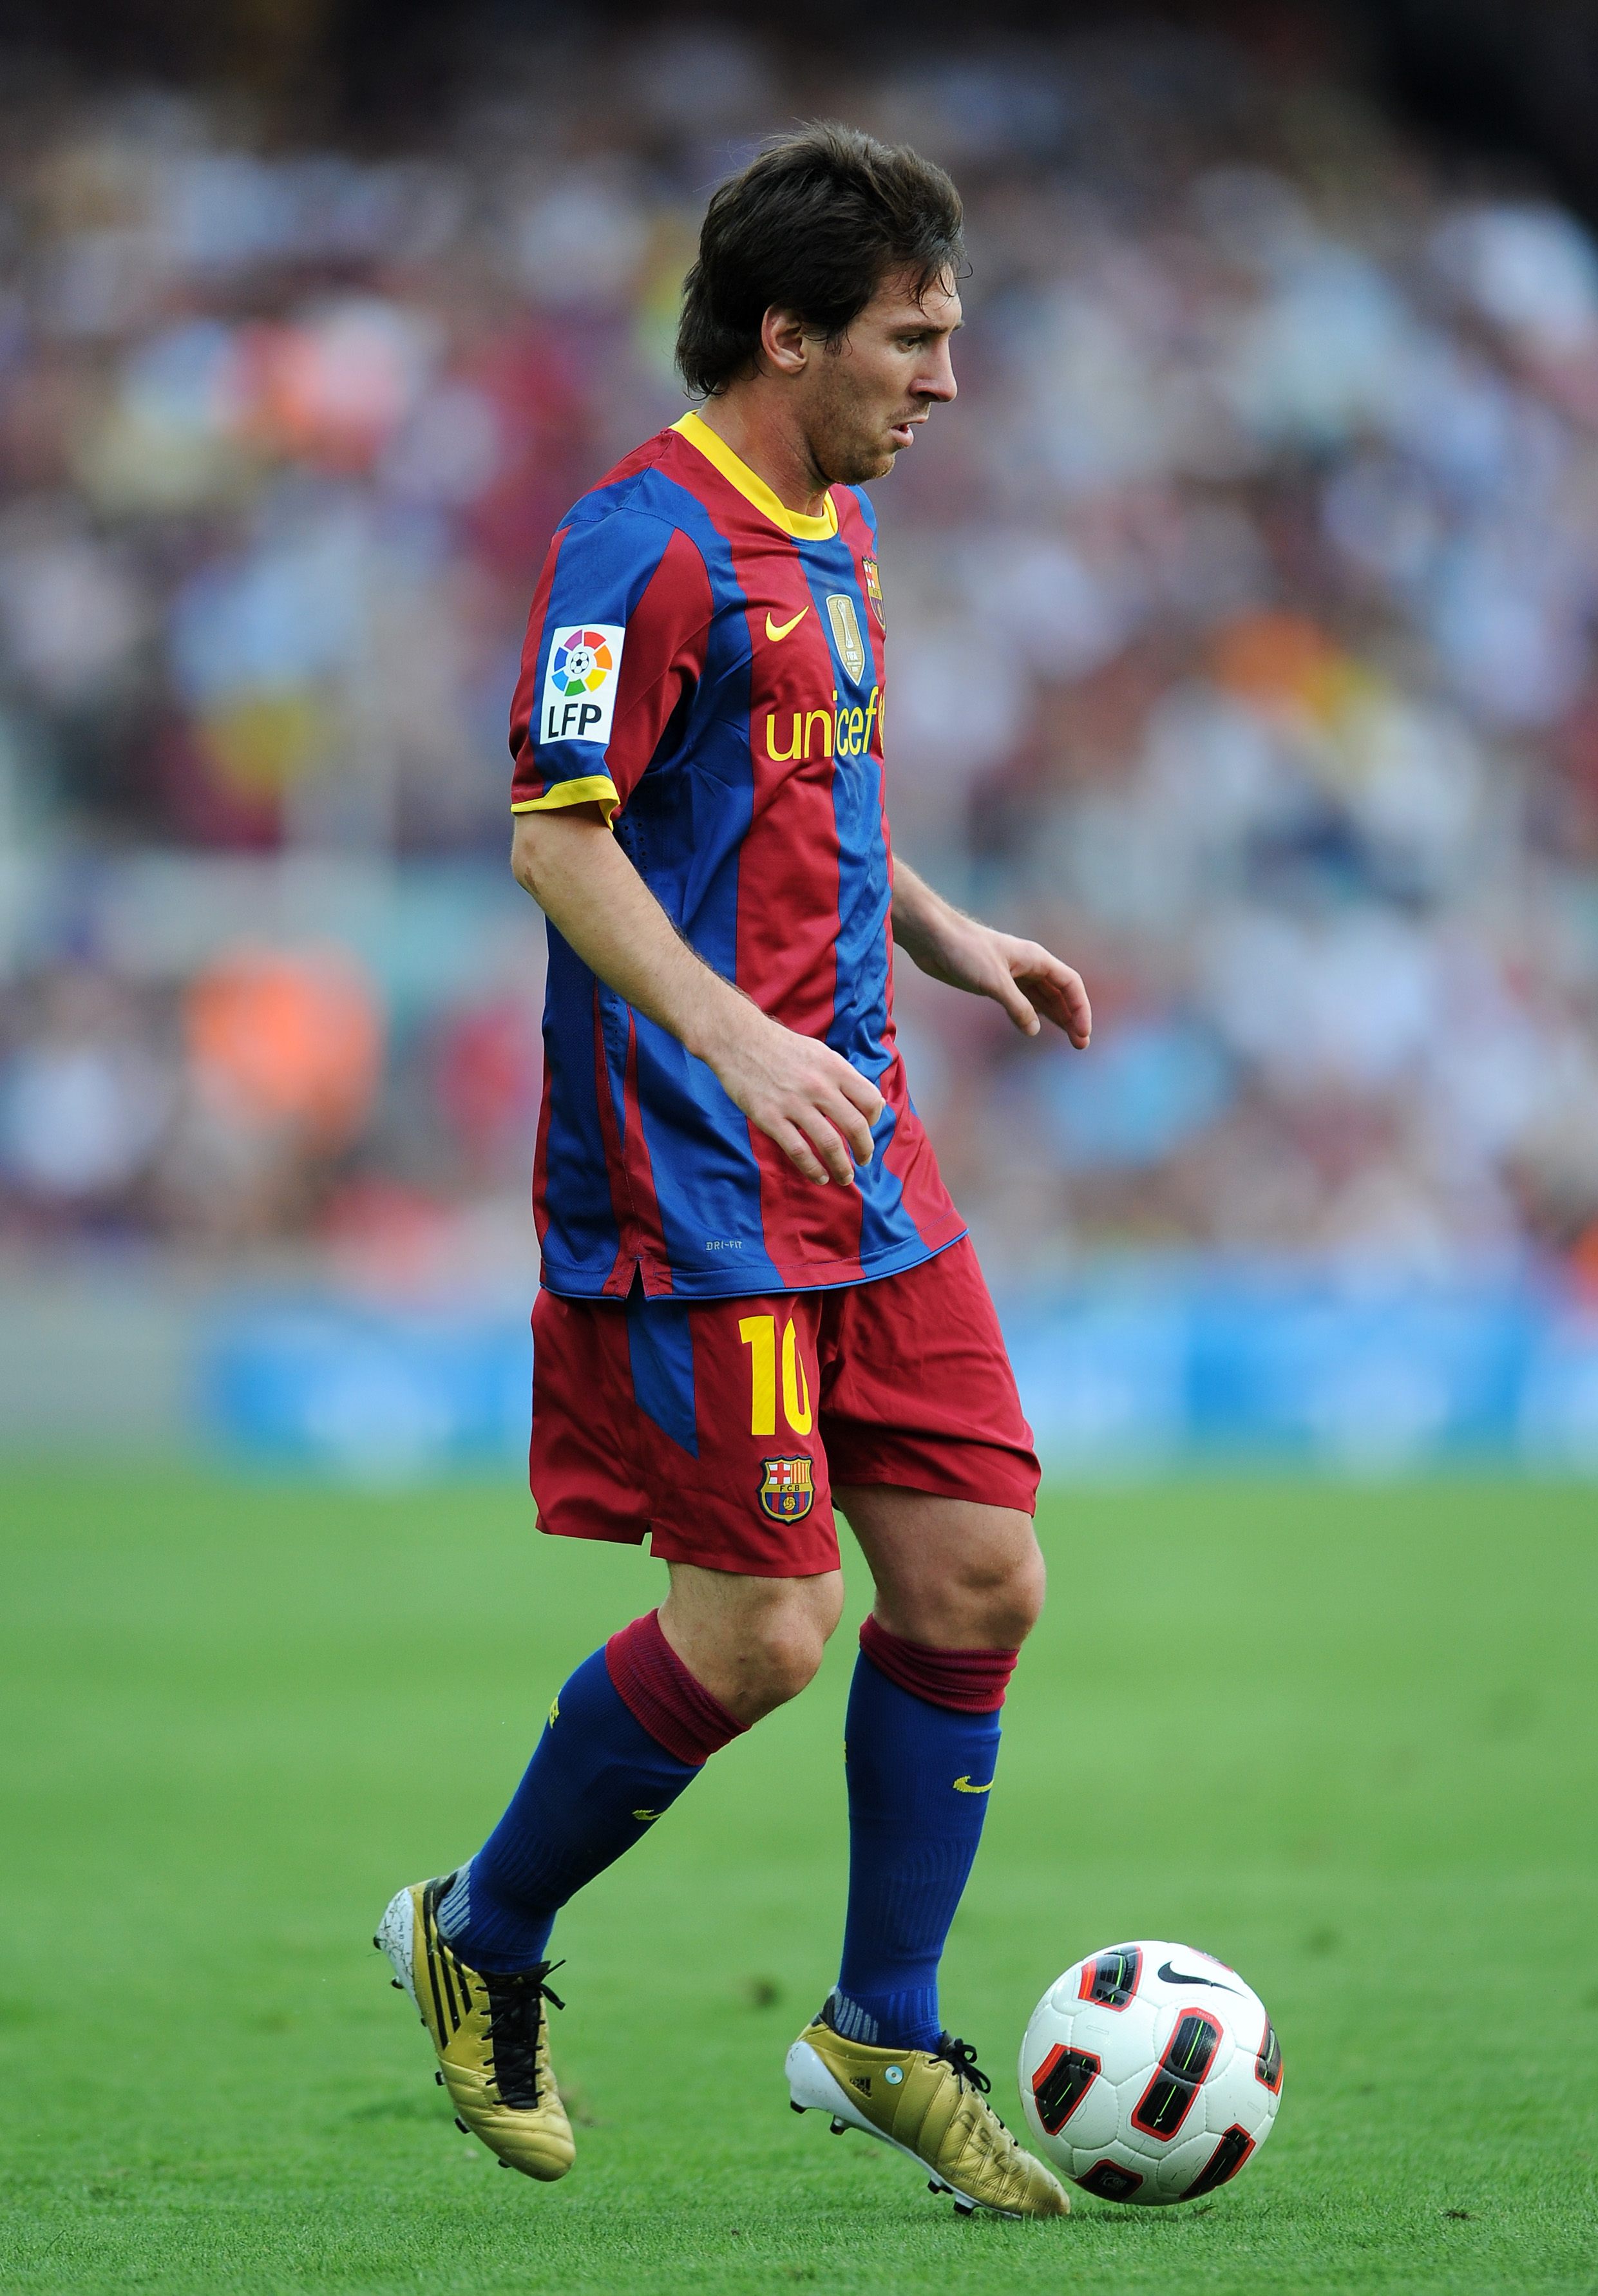 BARCELONA, SPAIN - SEPTEMBER 11:  Lionel Messi of Barcelona controls the ball during the La Liga match between Barcelona and Hercules at the Camp Nou stadium on September 11, 2010 in Barcelona, Spain. Barcelona lost the match 2-0.  (Photo by Jasper Juinen